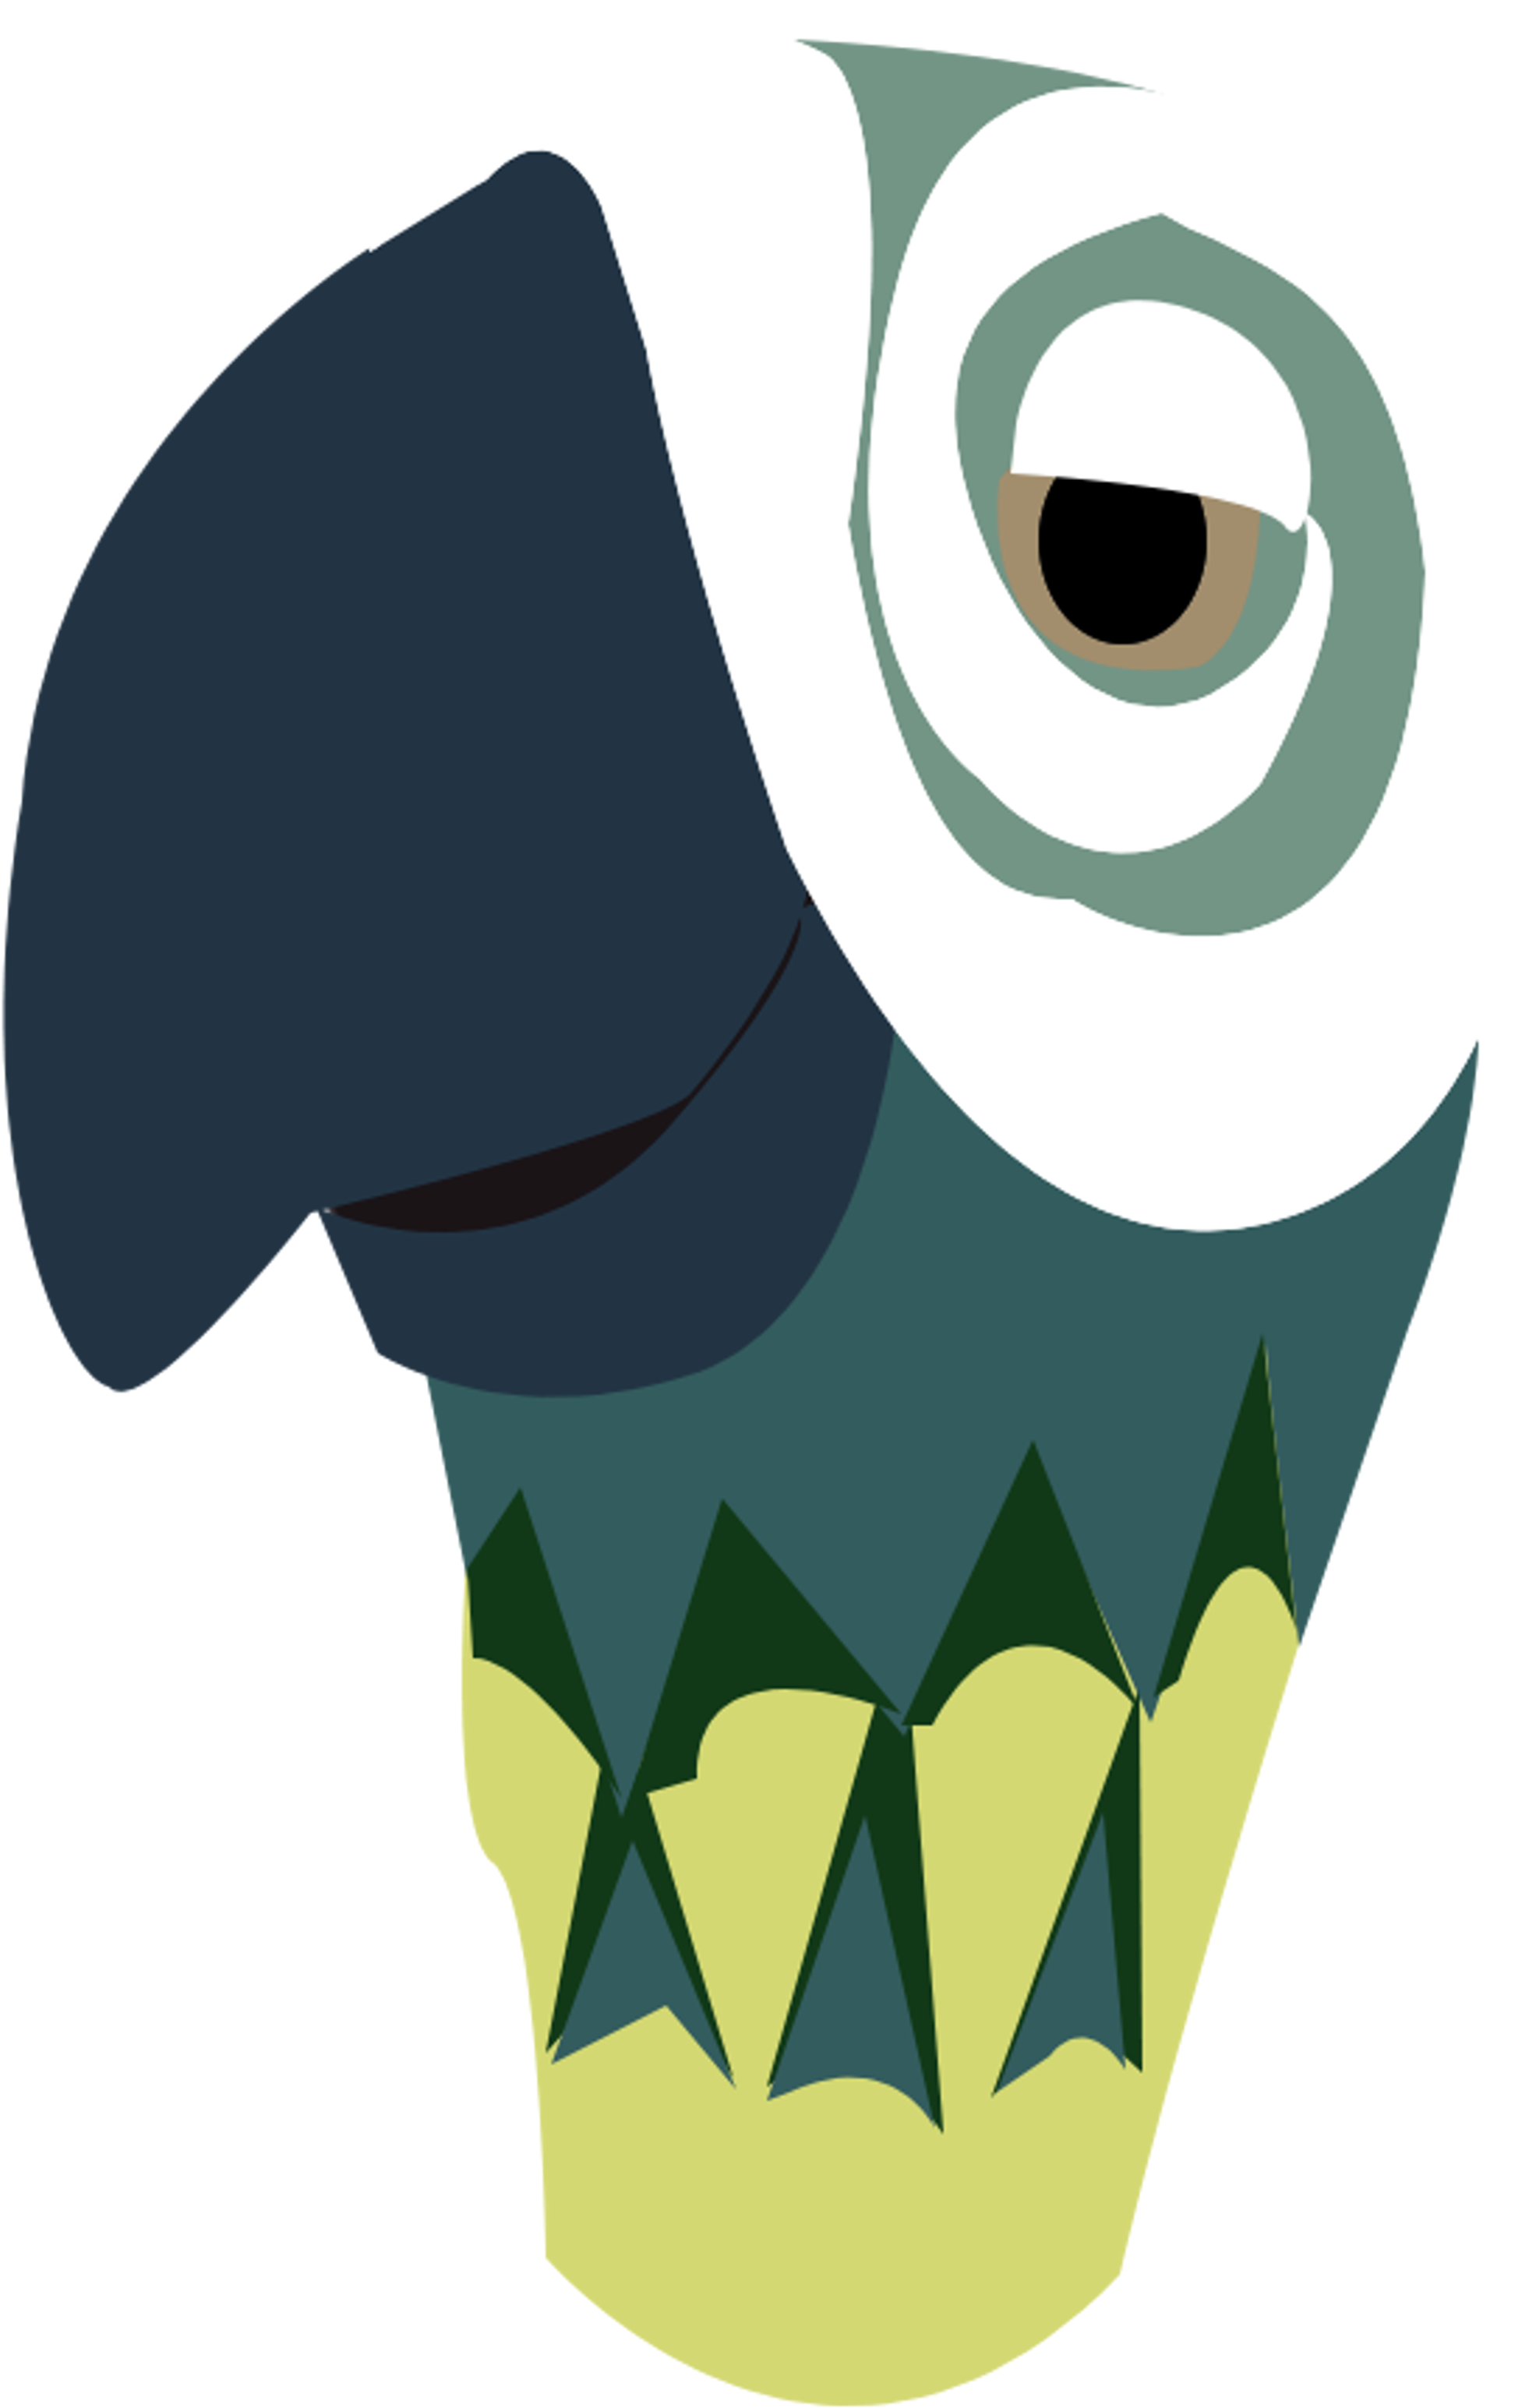 Abstract Bird Illustration.png PNG